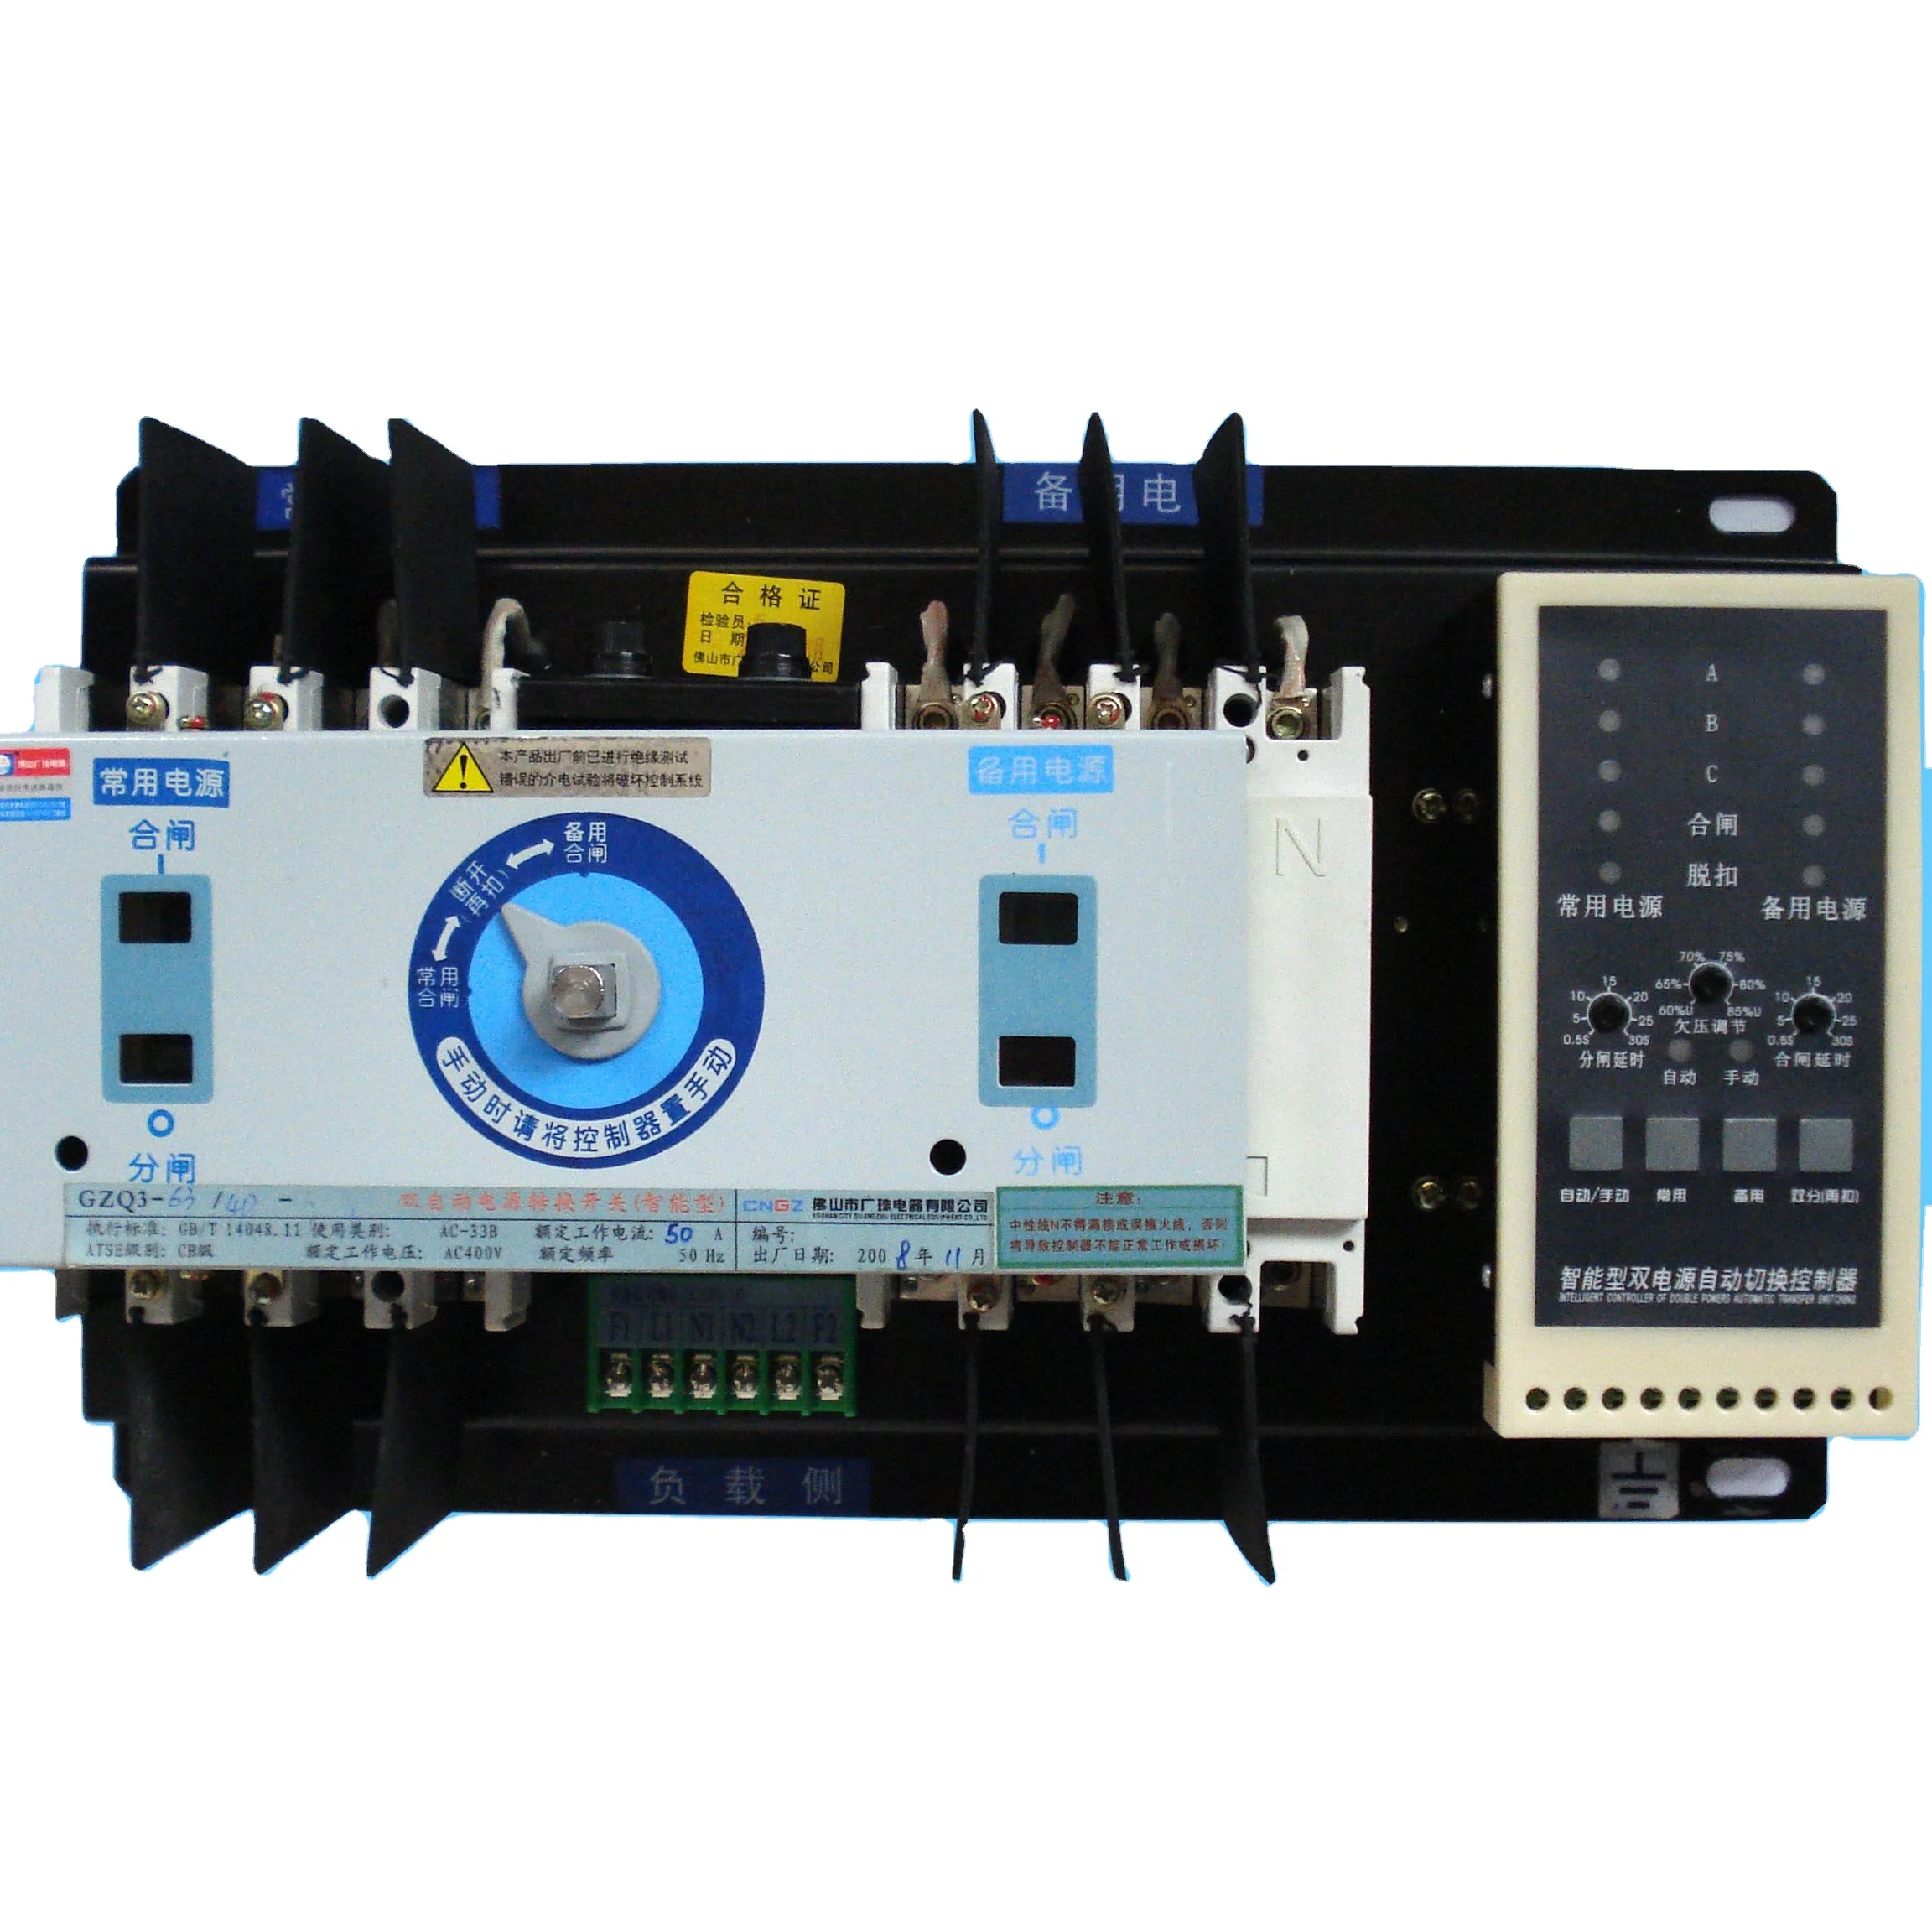 

3phase 4 phase 100a 200 amp AC electrical change over switch generator automatic transfer switch